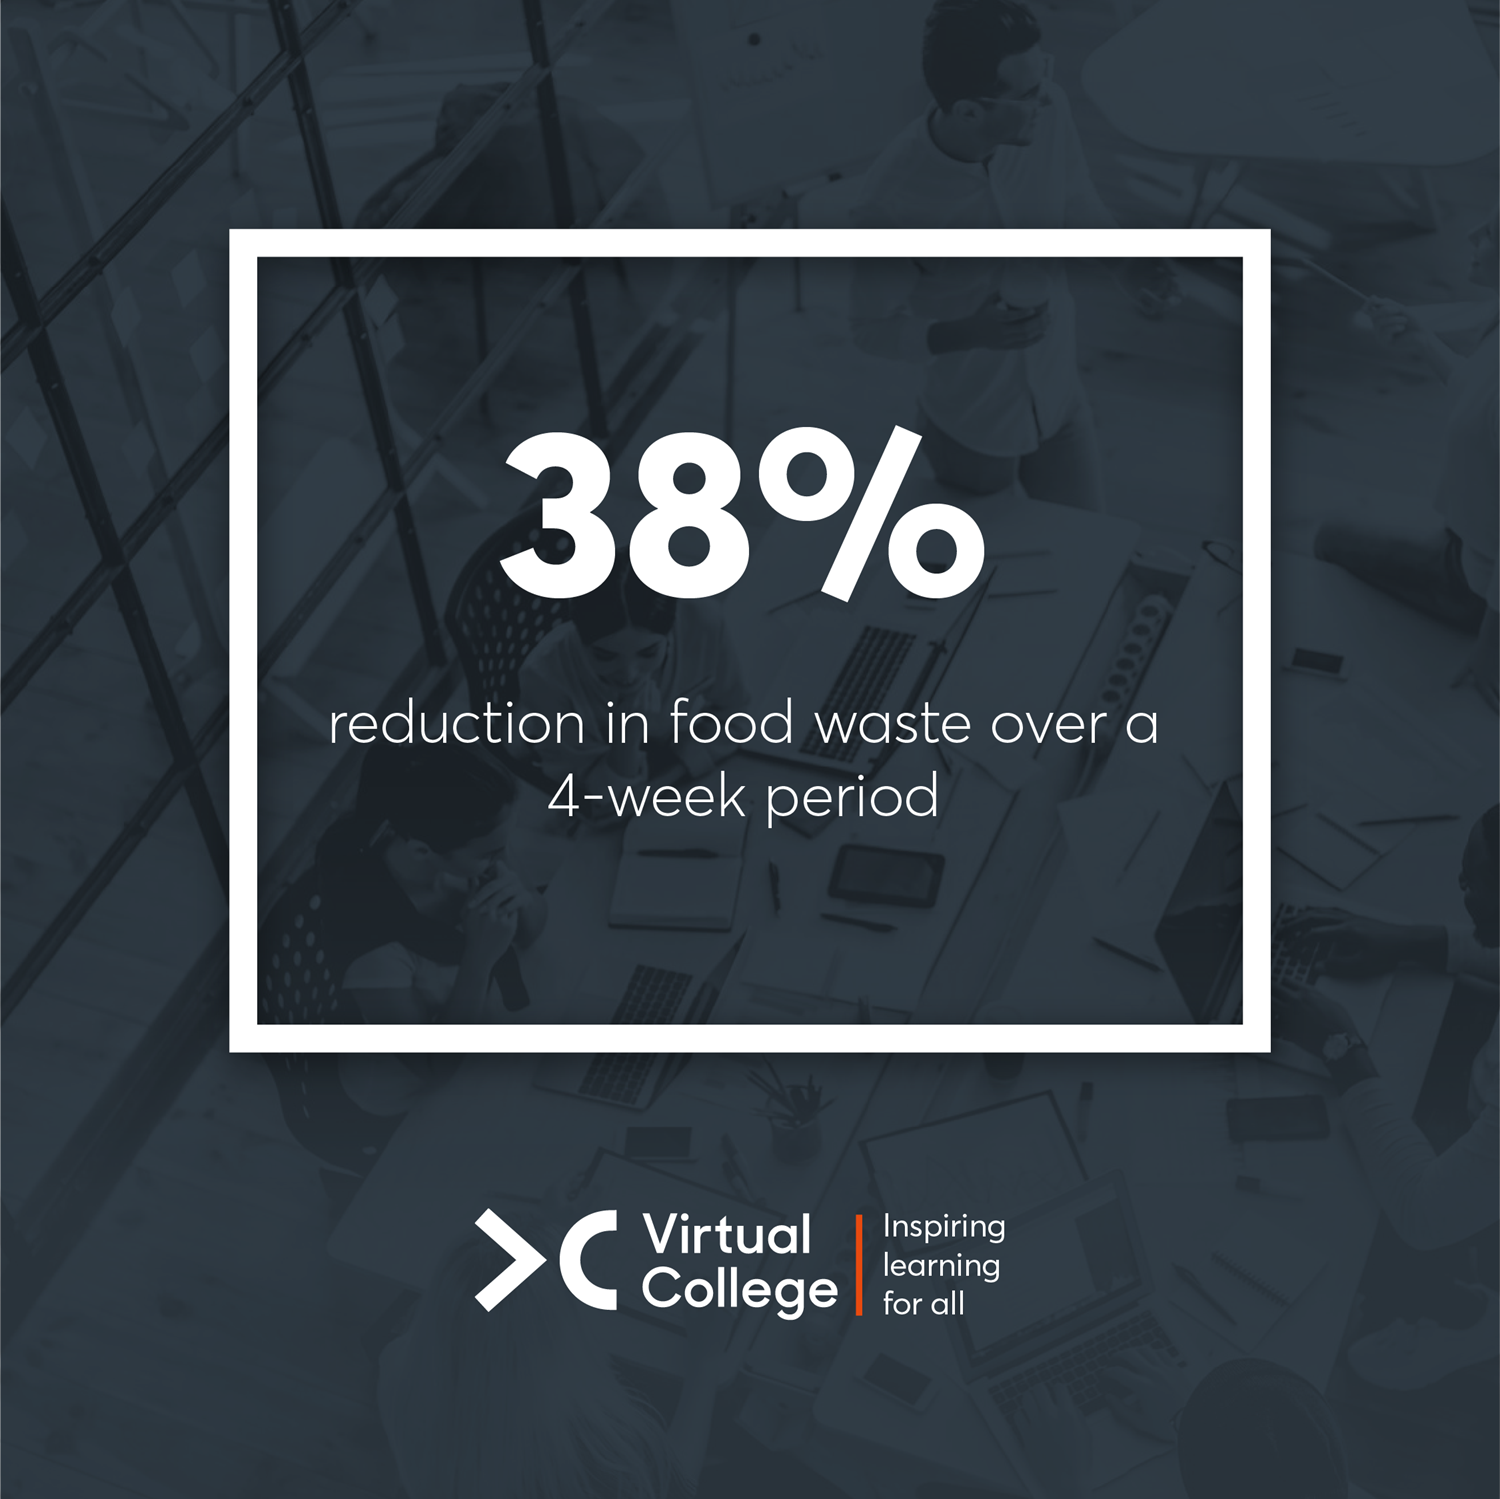 38% reduction in food waste over a 4-week period